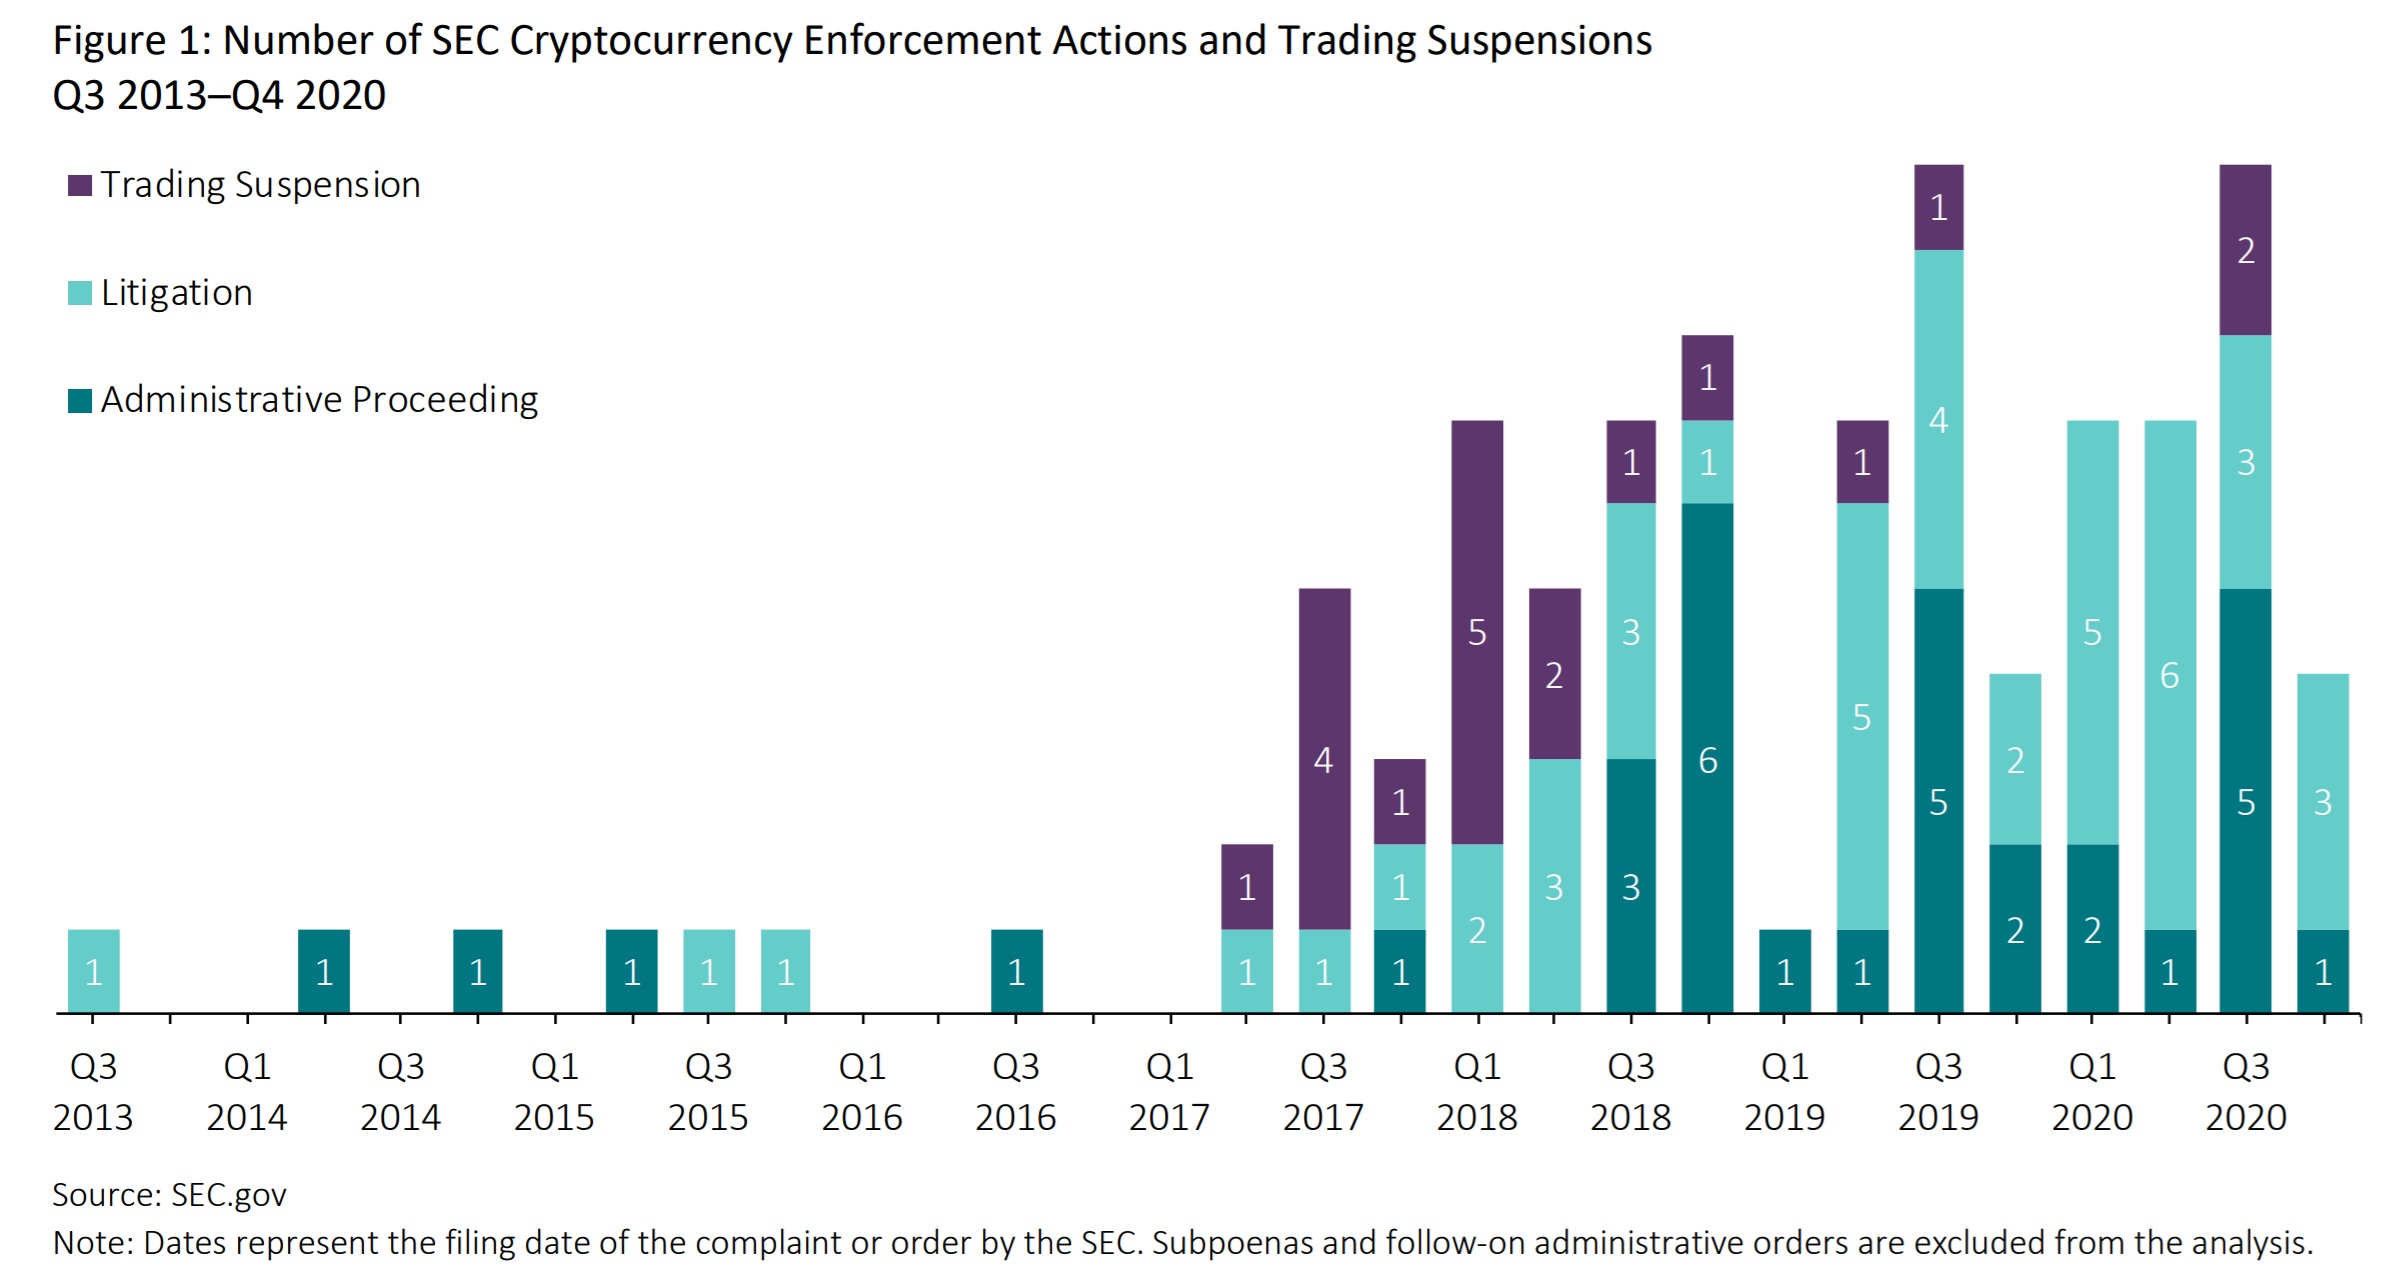 US SEC Has Brought 75 Enforcement Actions on Crypto Industry